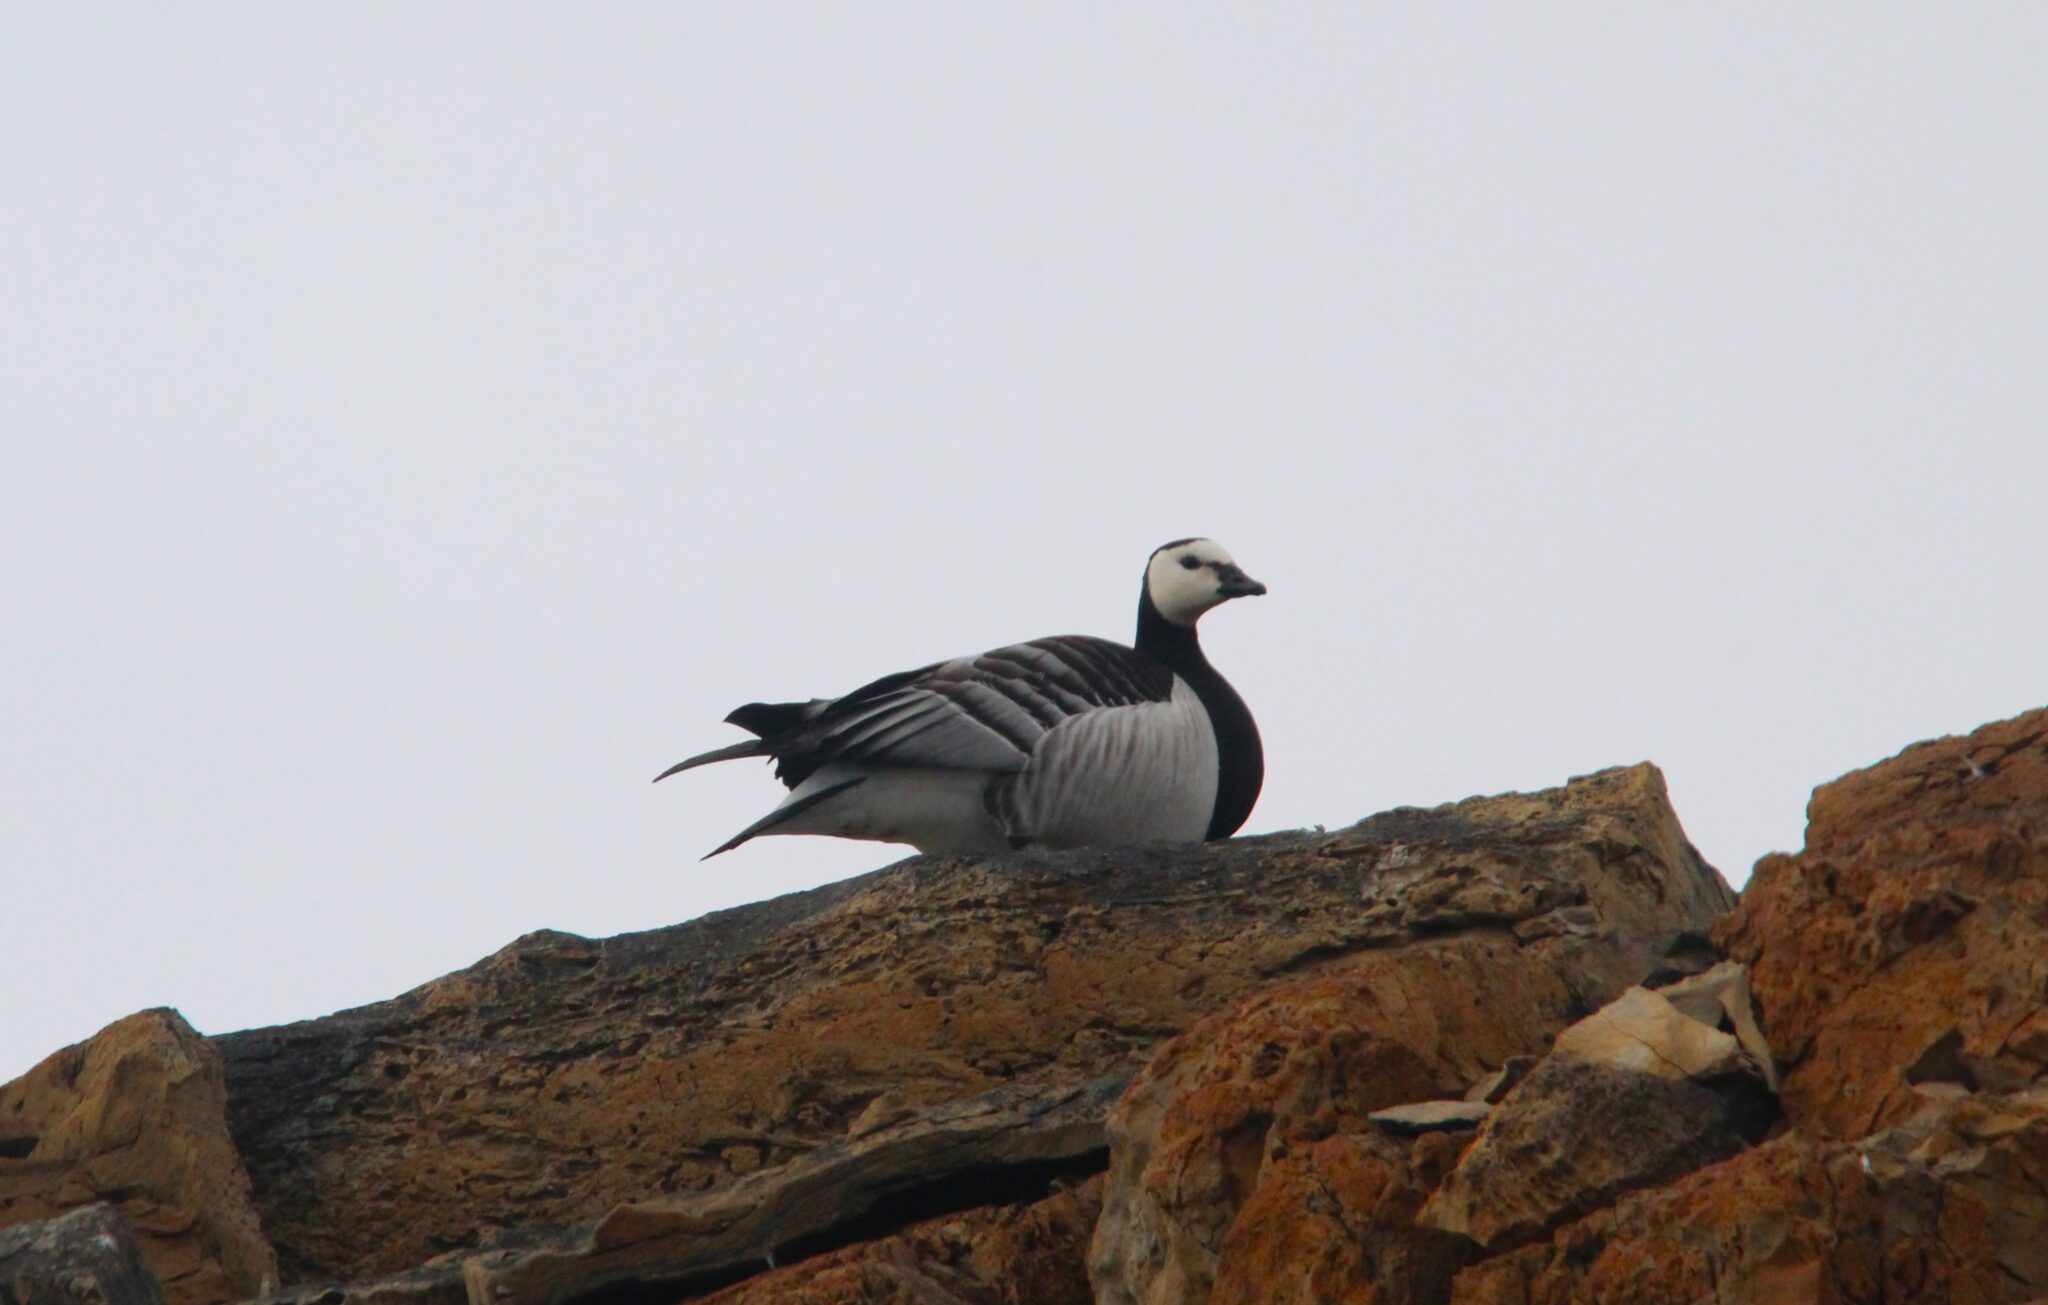 Aurora Expeditions Barnacle Goose sighting - photo by Golding Travel
